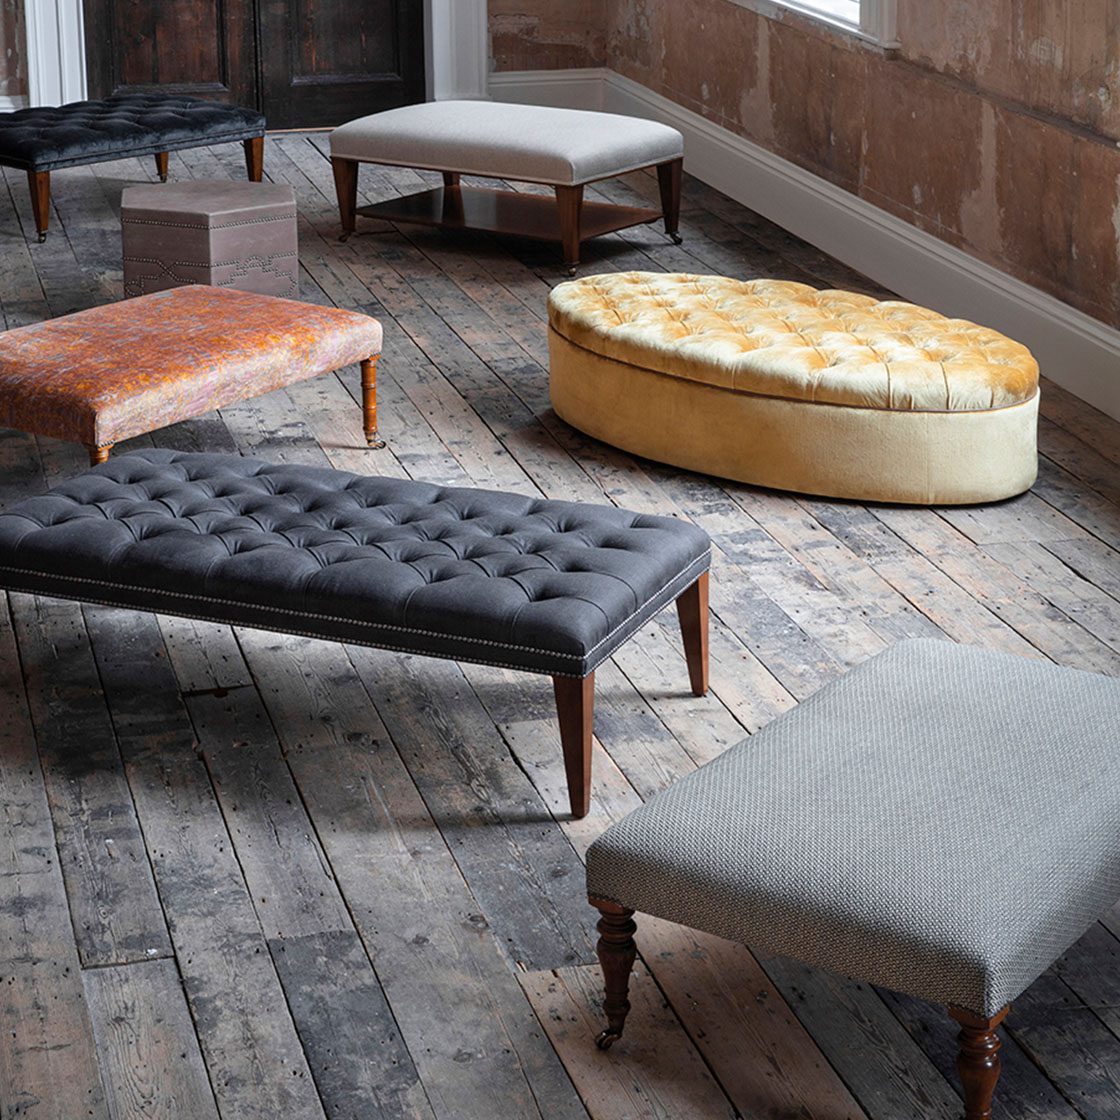 Footstool and ottoman collection - Beaumont & Fletcher